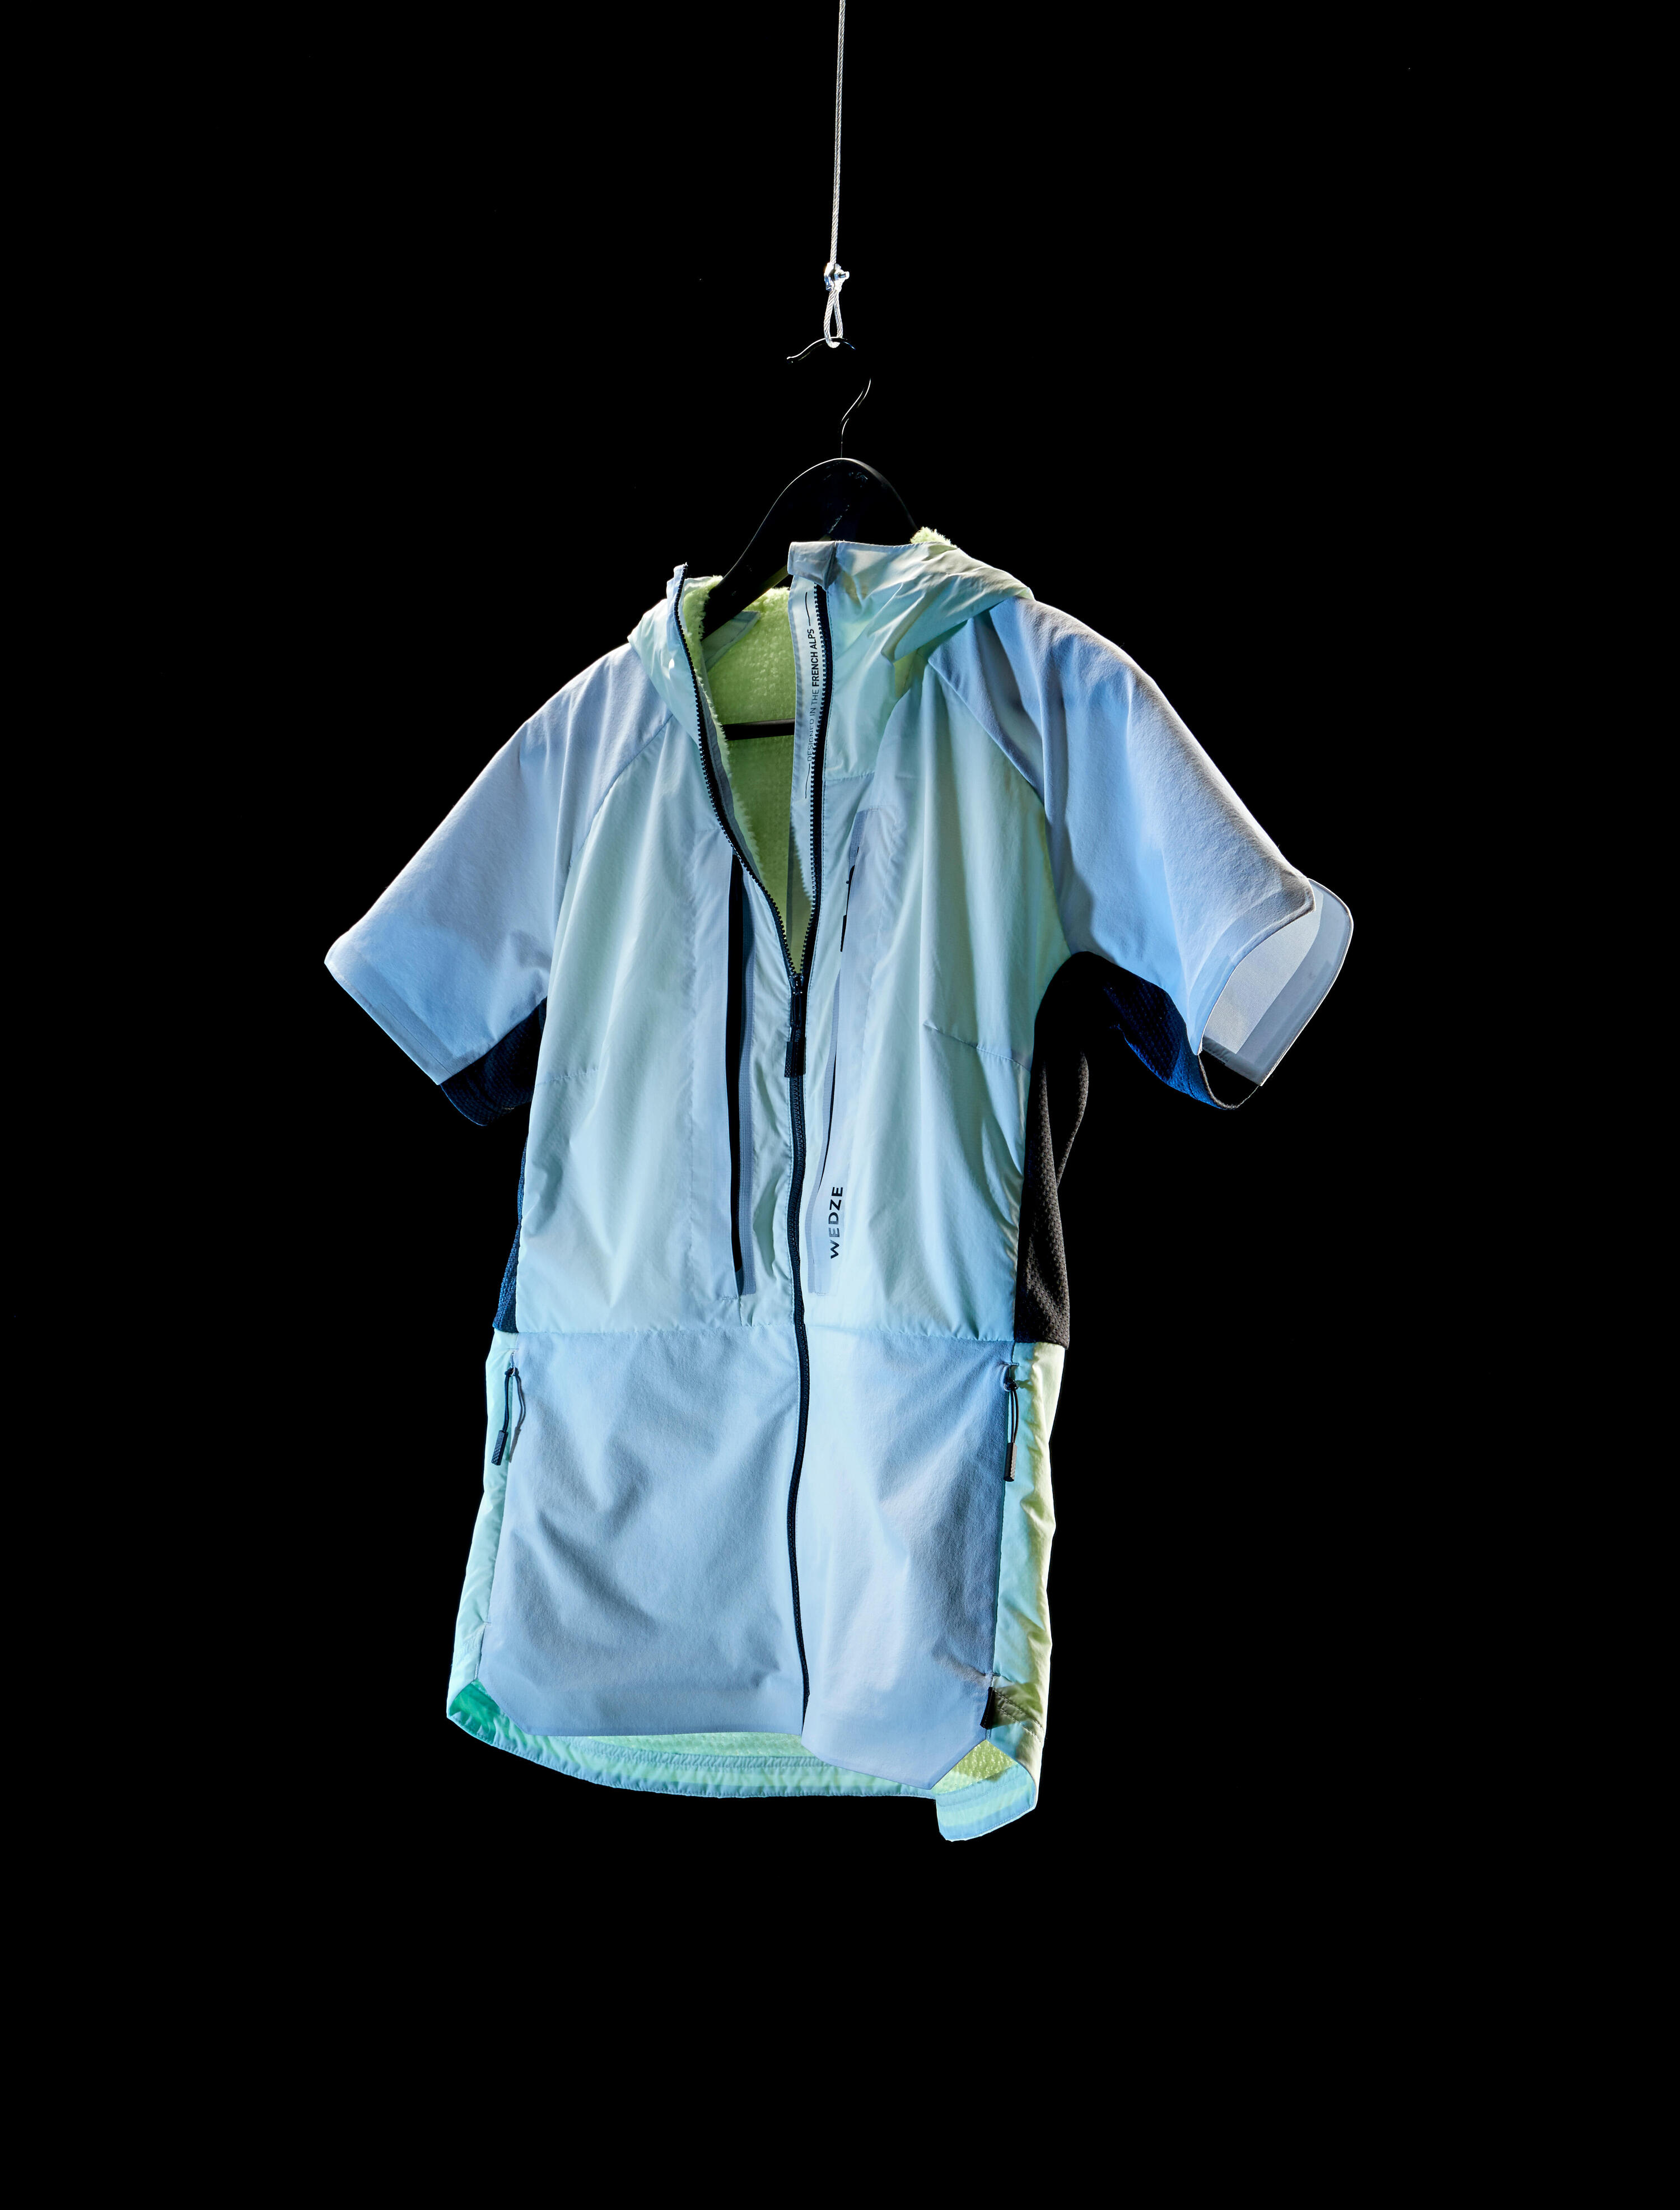 WOMEN'S X-COUNTRY SKIING PACER SHORT-SLEEVED GILET- ICY BLUE AND YELLOW 2/13